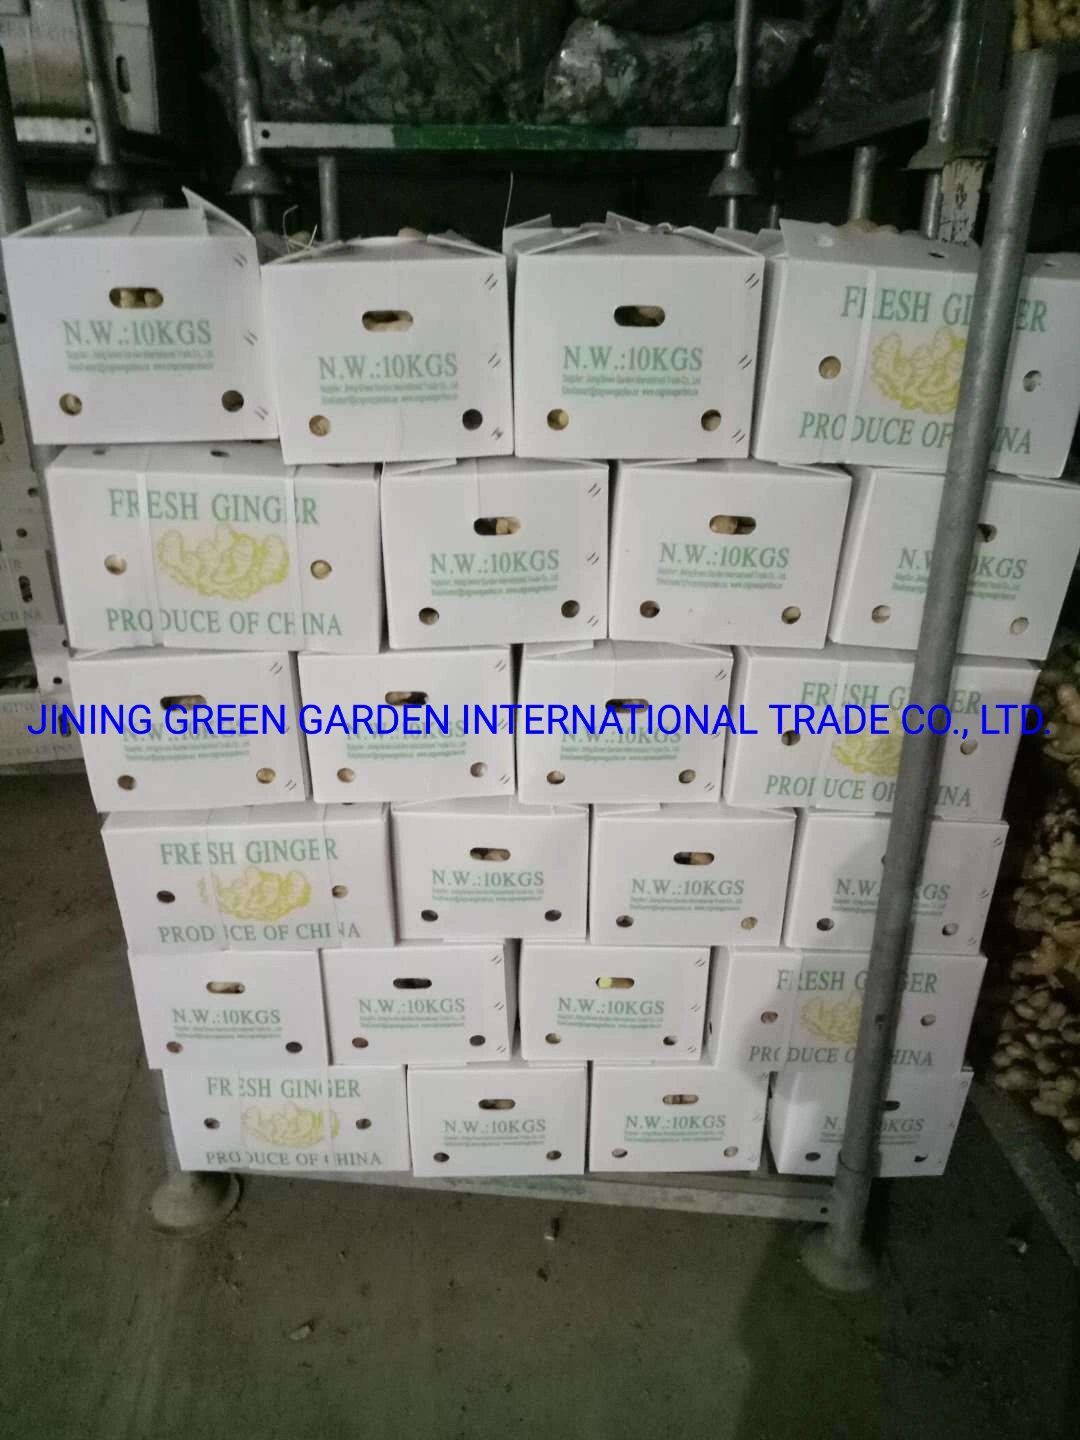 Hot Selling Factory Supplier 100g/150g/200g/250g/300g and up Air Dry Ginger From China with Mesh Bag/PVC/Carton Box Packing, Top Quality Good Price Dry Ginger